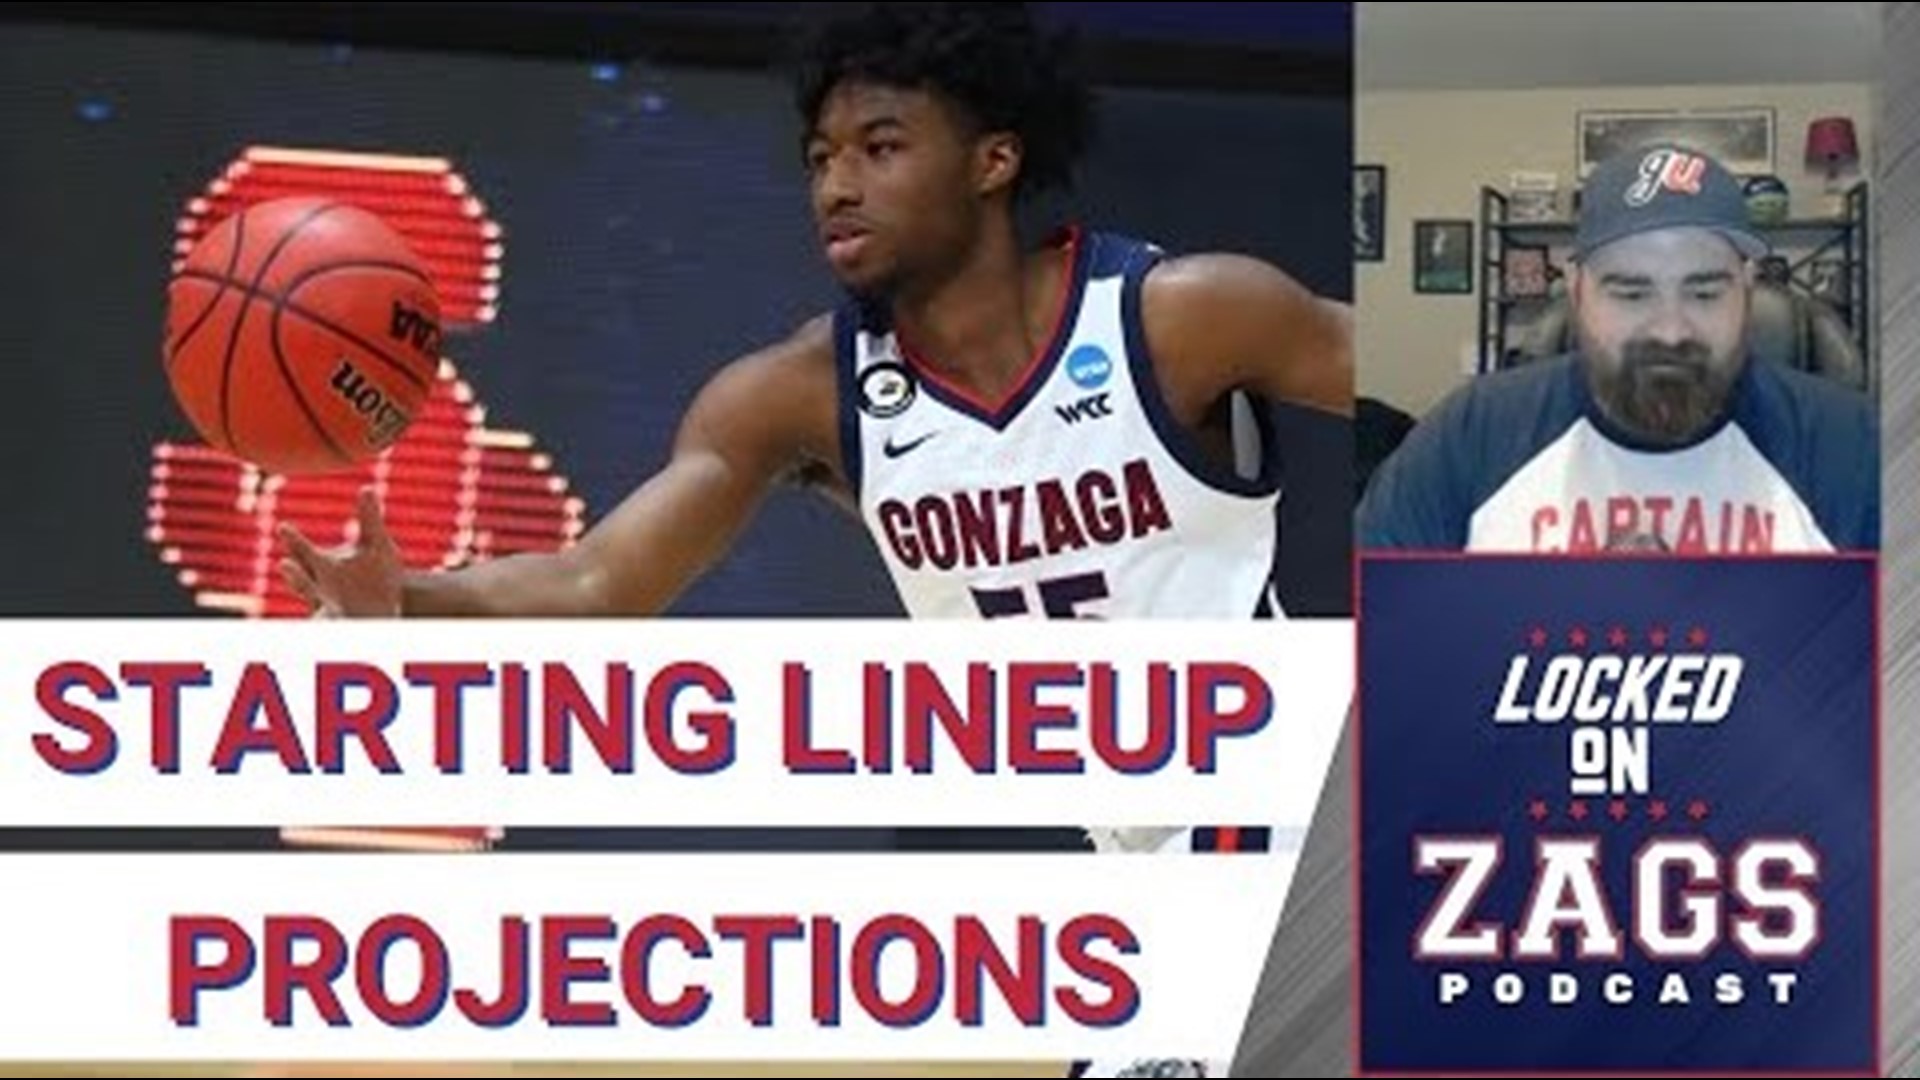 Gonzaga has perhaps the most talented roster in program history, giving Mark Few an incredibly tough task of finding the perfect starting lineup.